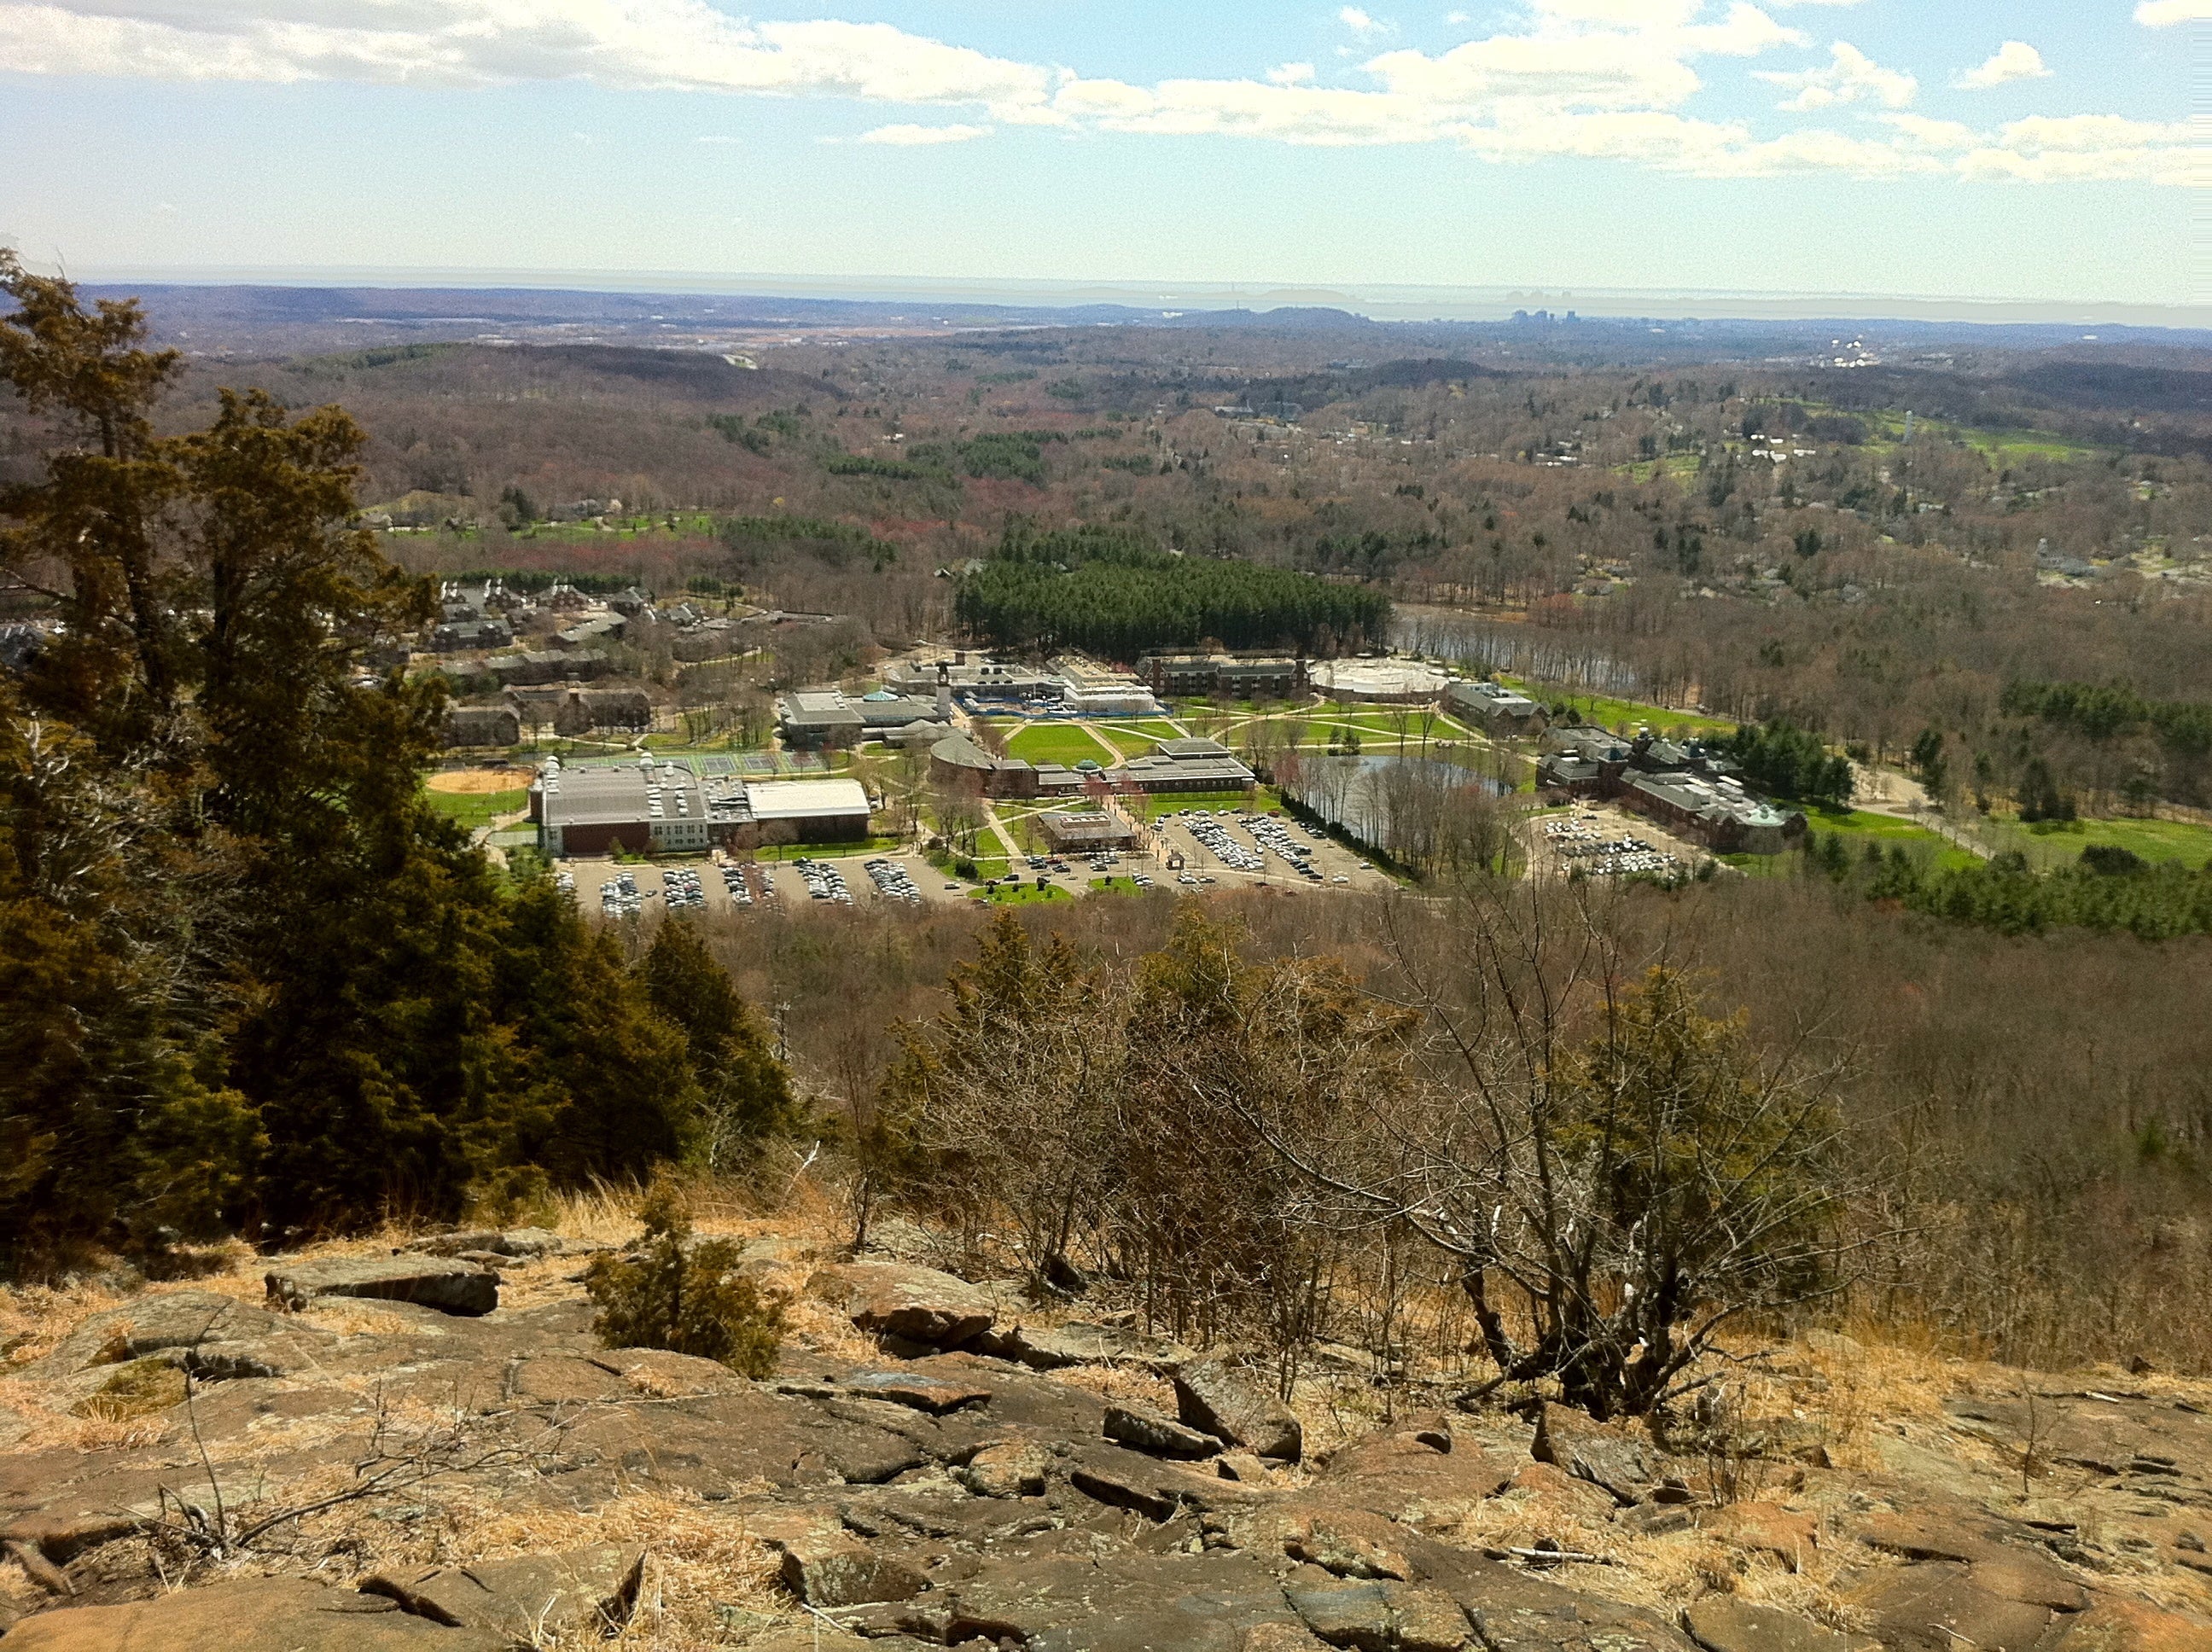 View of Quinnipiac University's main campus from Connecticut's Sleeping Giant's Green Trail terminus junction with the White Trail overlook.